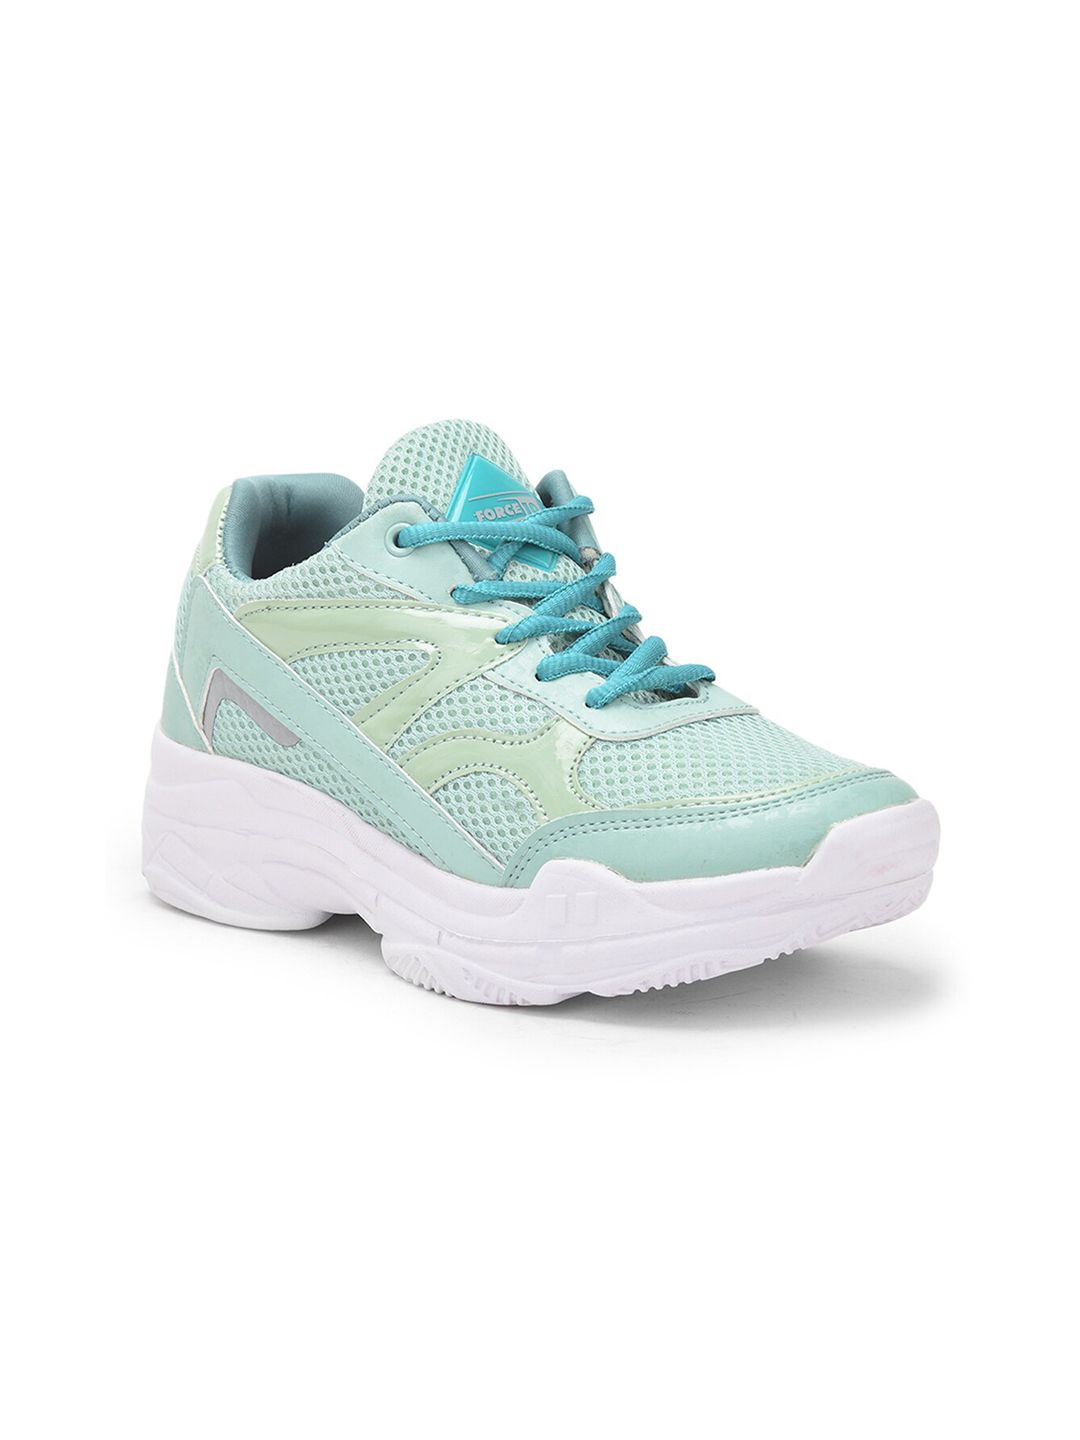 Liberty Women Green Mesh Running Non-Marking Sports Shoes Price in India